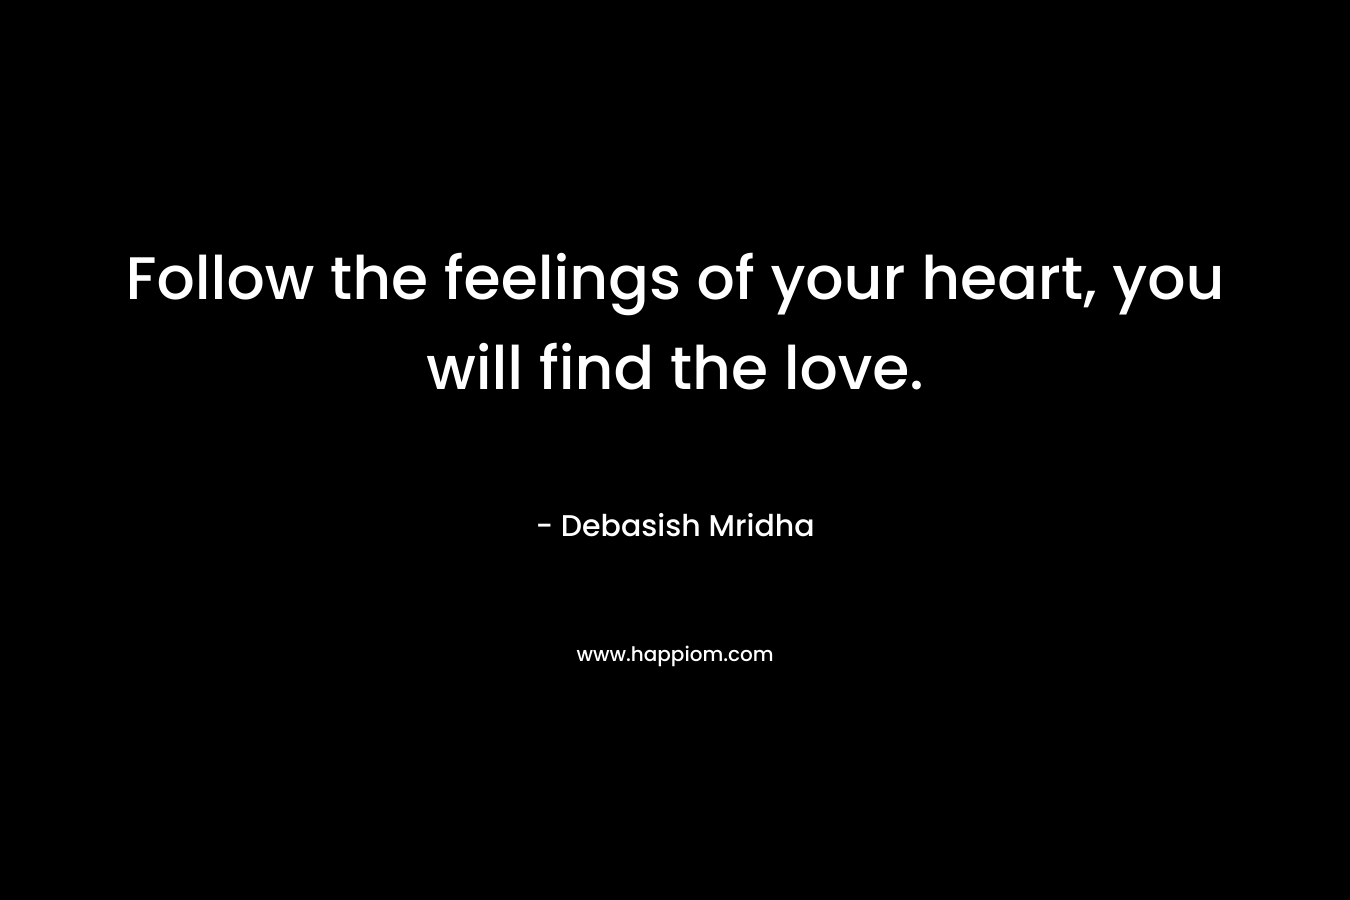 Follow the feelings of your heart, you will find the love.